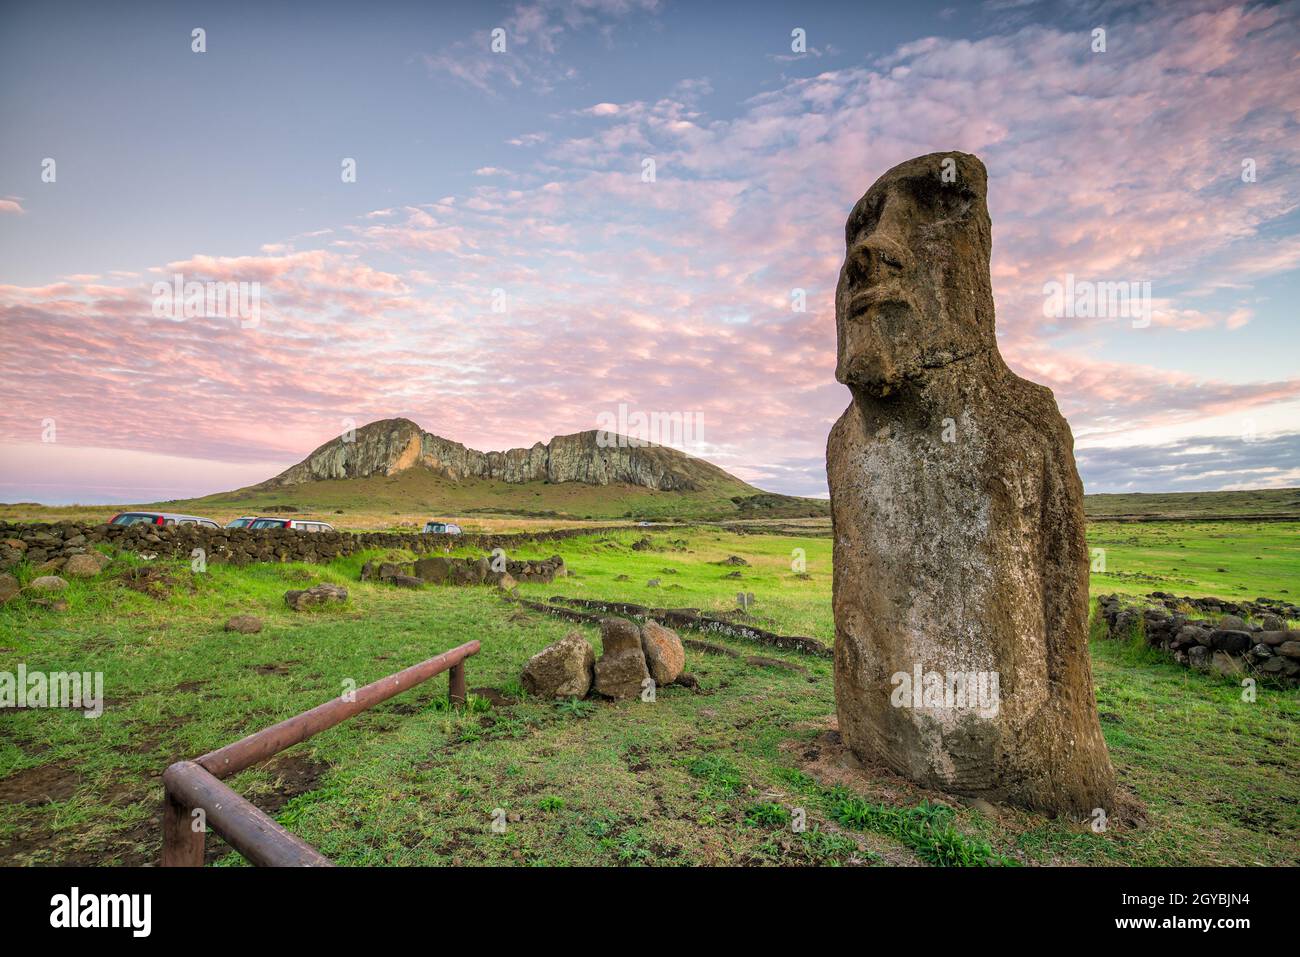 Moais at Ahu Tongariki in Easter island, Chile Stock Photo